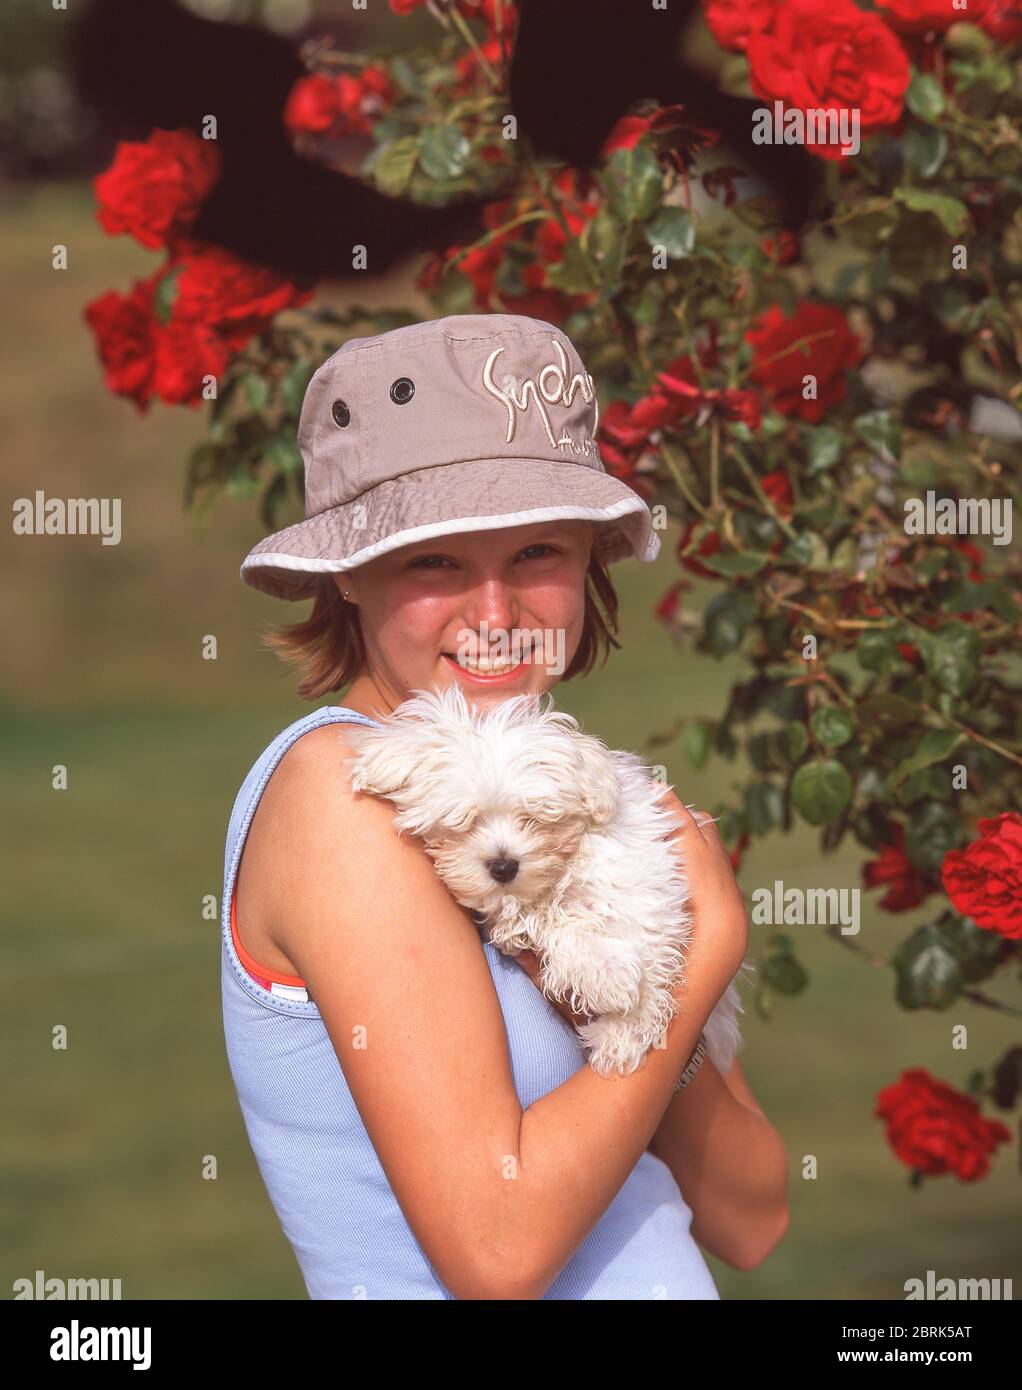 Young girl holding small puppy, Cashmere, Christchurch, Canterbury Region, New Zealand Stock Photo